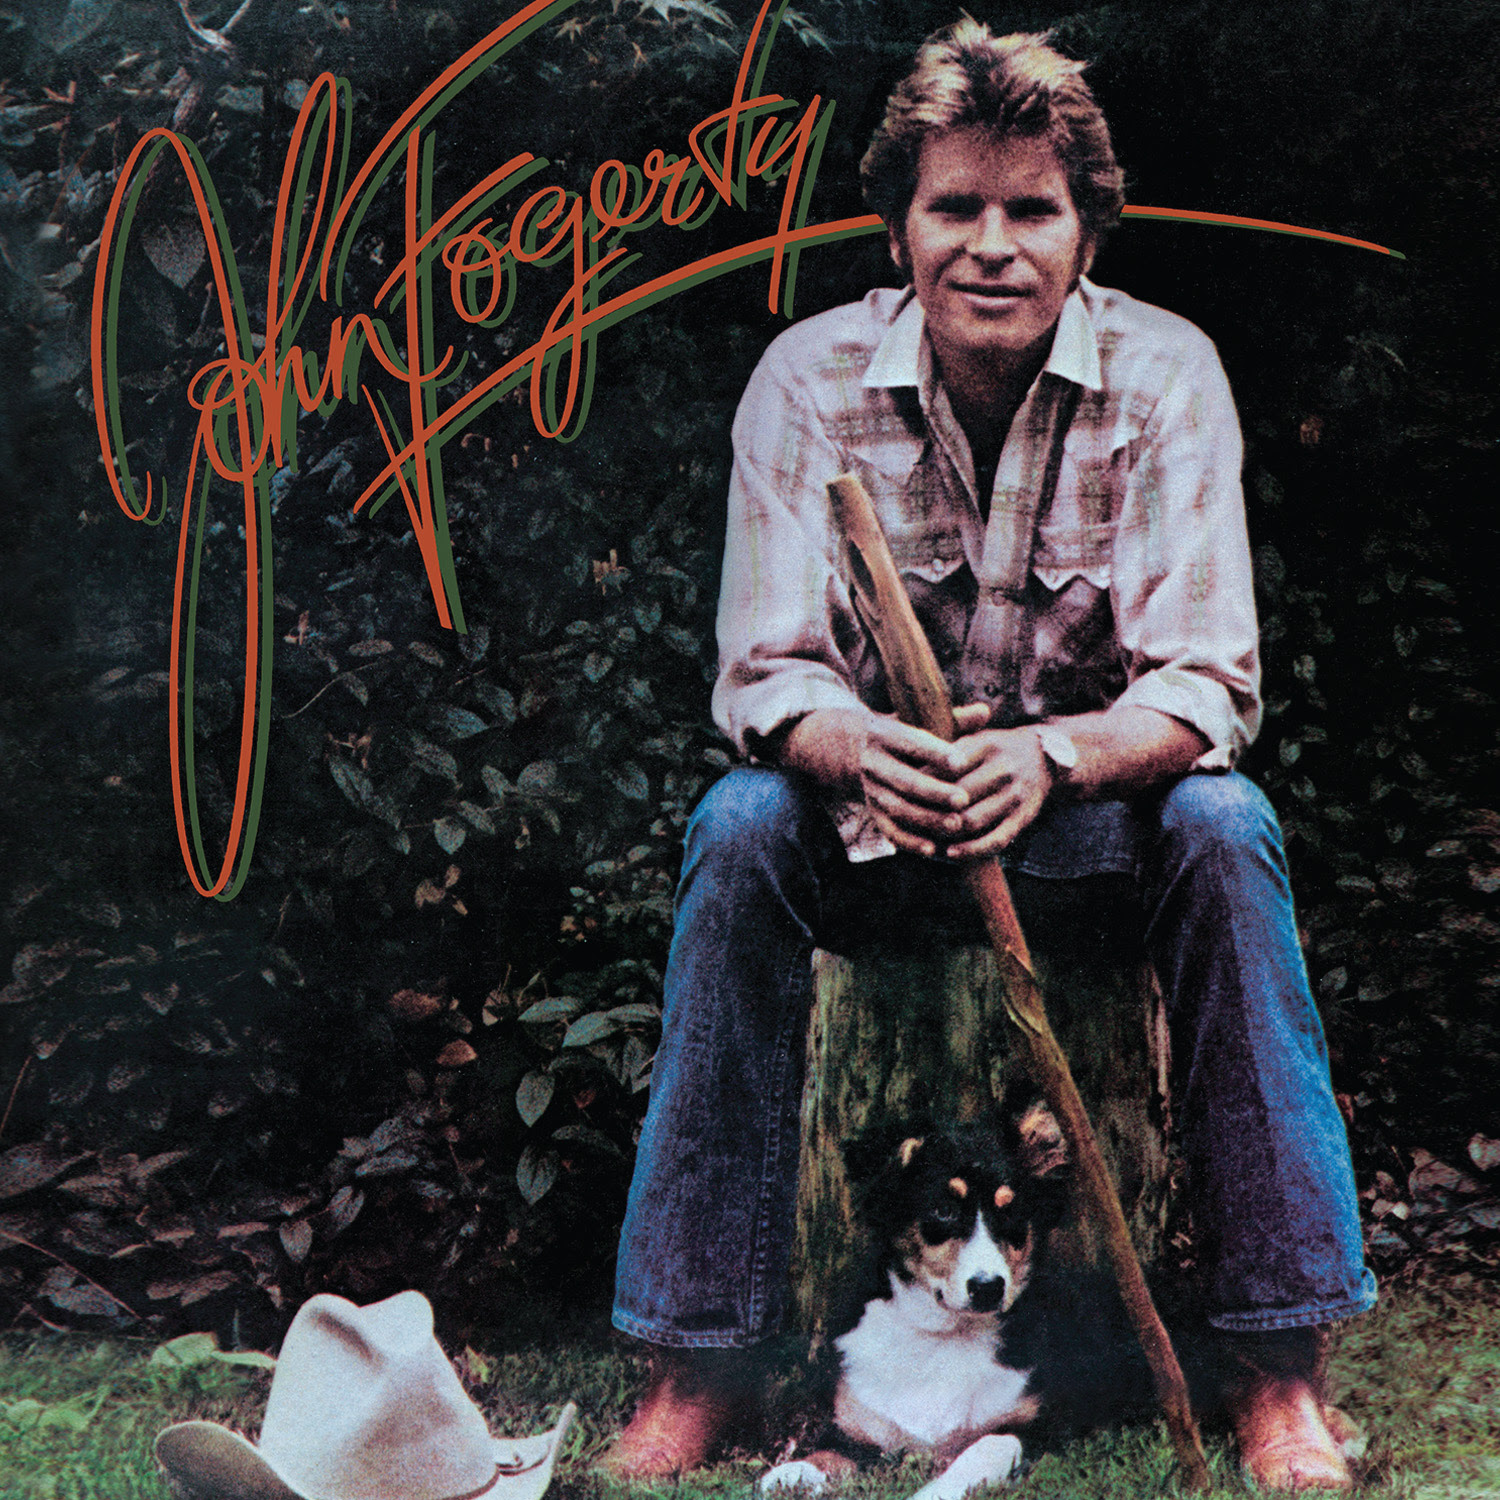 JOHN FOGERTY Commemorates the 50th Anniversary of his Solo Career with Special Vinyl Releases